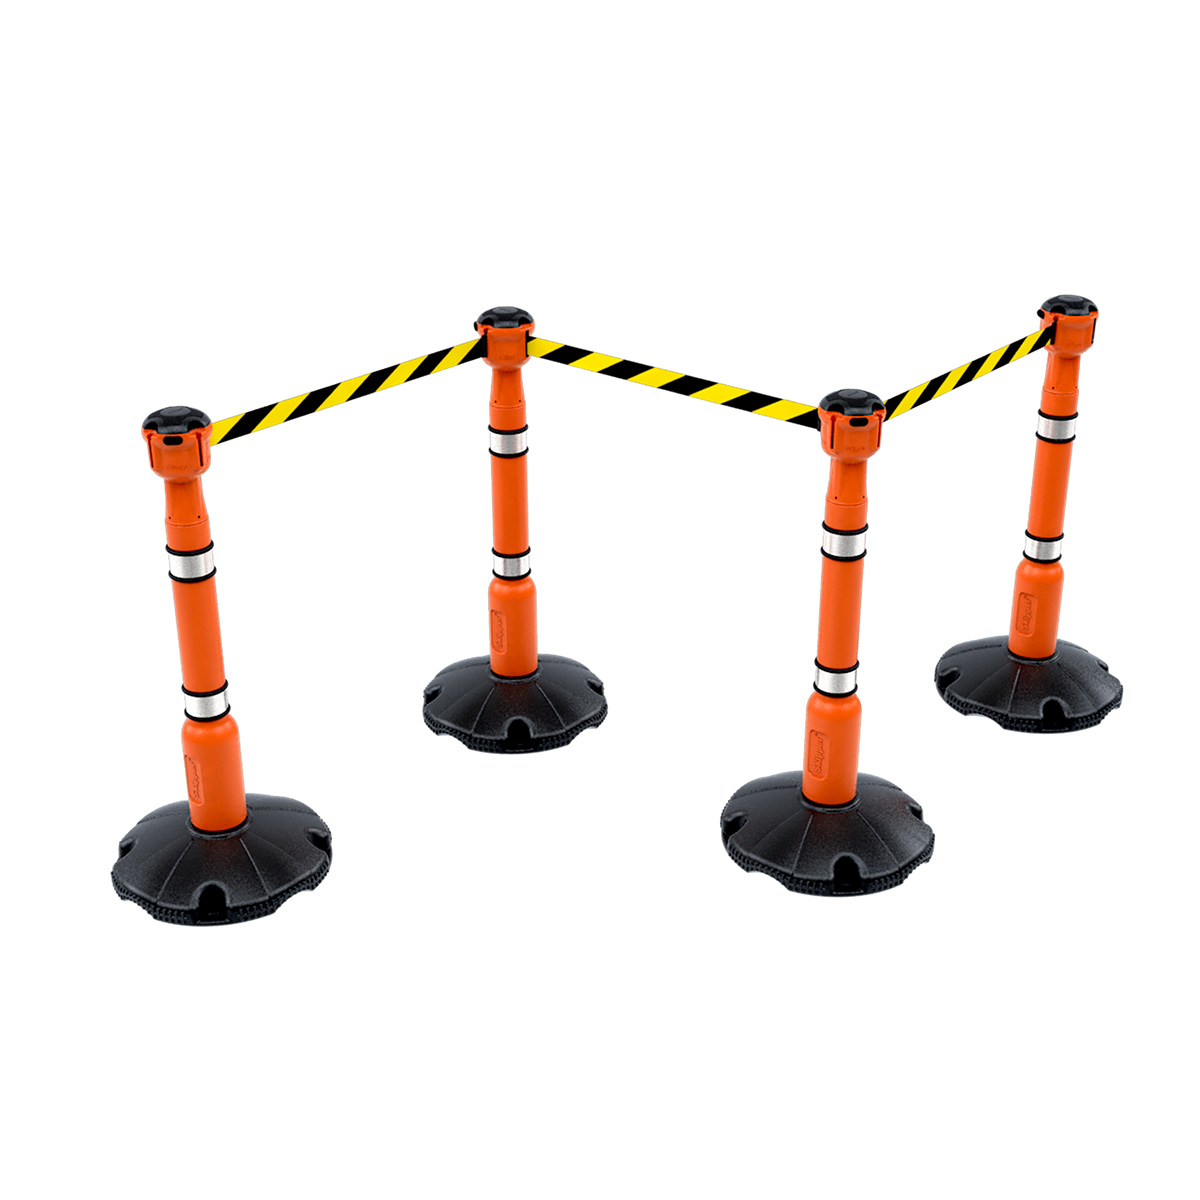 Skipper™ Portable Safety Barrier Kit 27m Incudes 4 Post And Base Systems With 3 Retractable tape Units